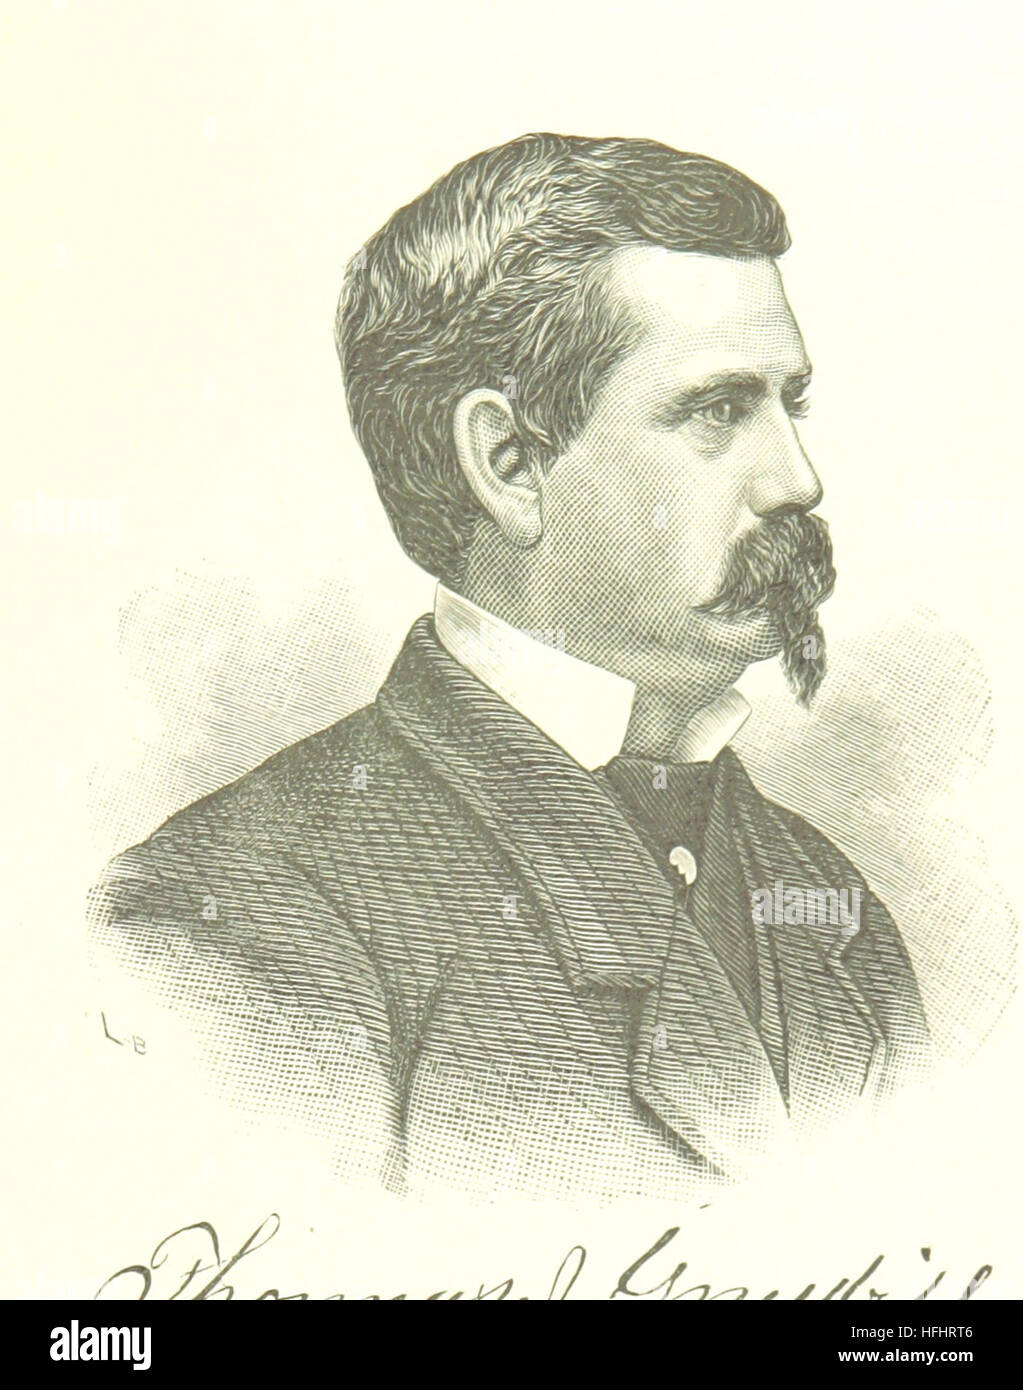 Image taken from page 181 of '1763. Combined History of Shelby and Moultrie Counties ... With illustrations, etc' Image taken from page 181 of '1763 Combined History of Stock Photo